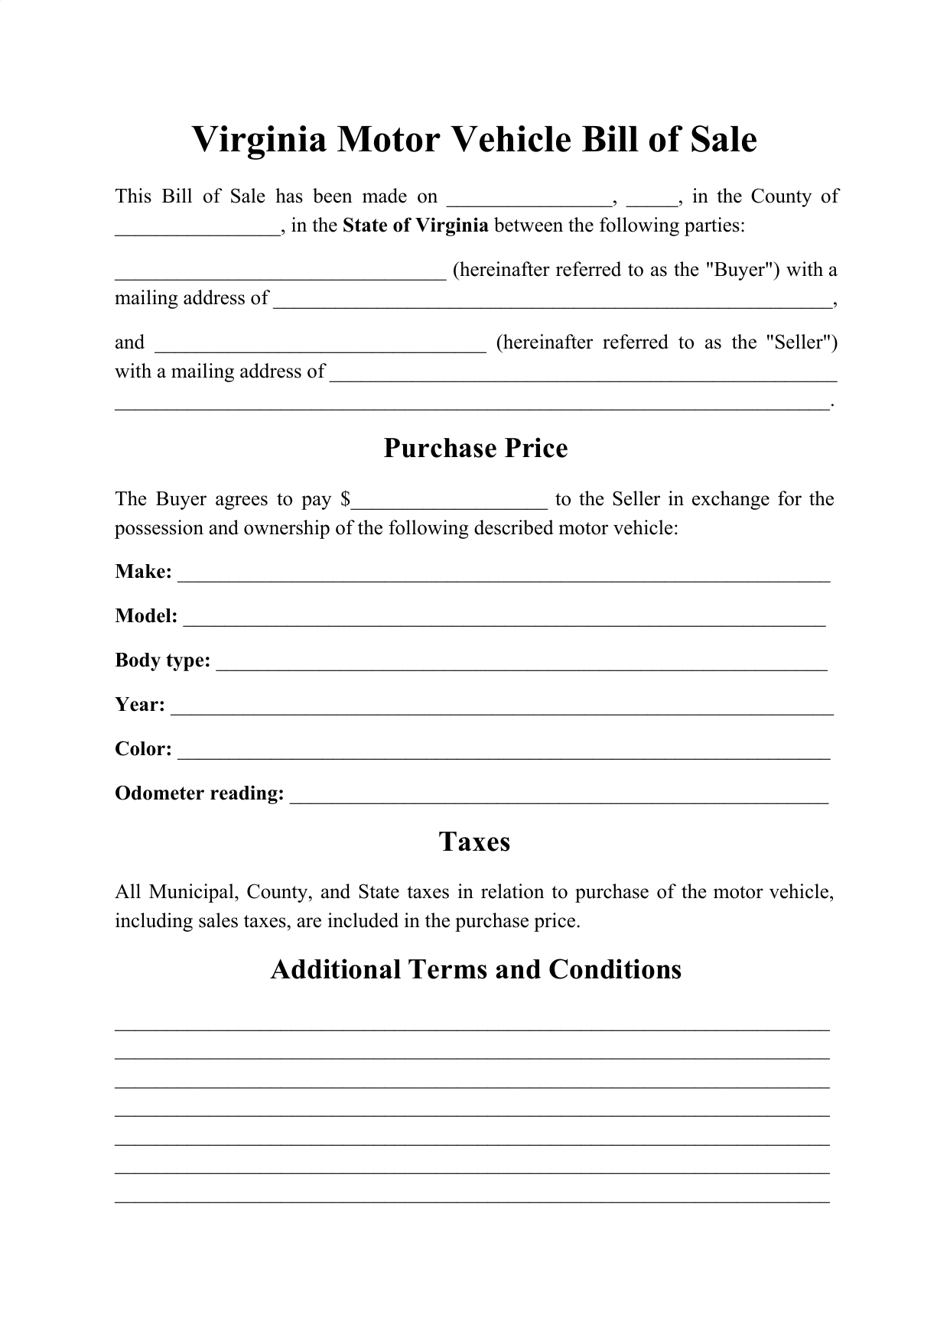 Motor Vehicle Bill of Sale Form - Virginia, Page 1